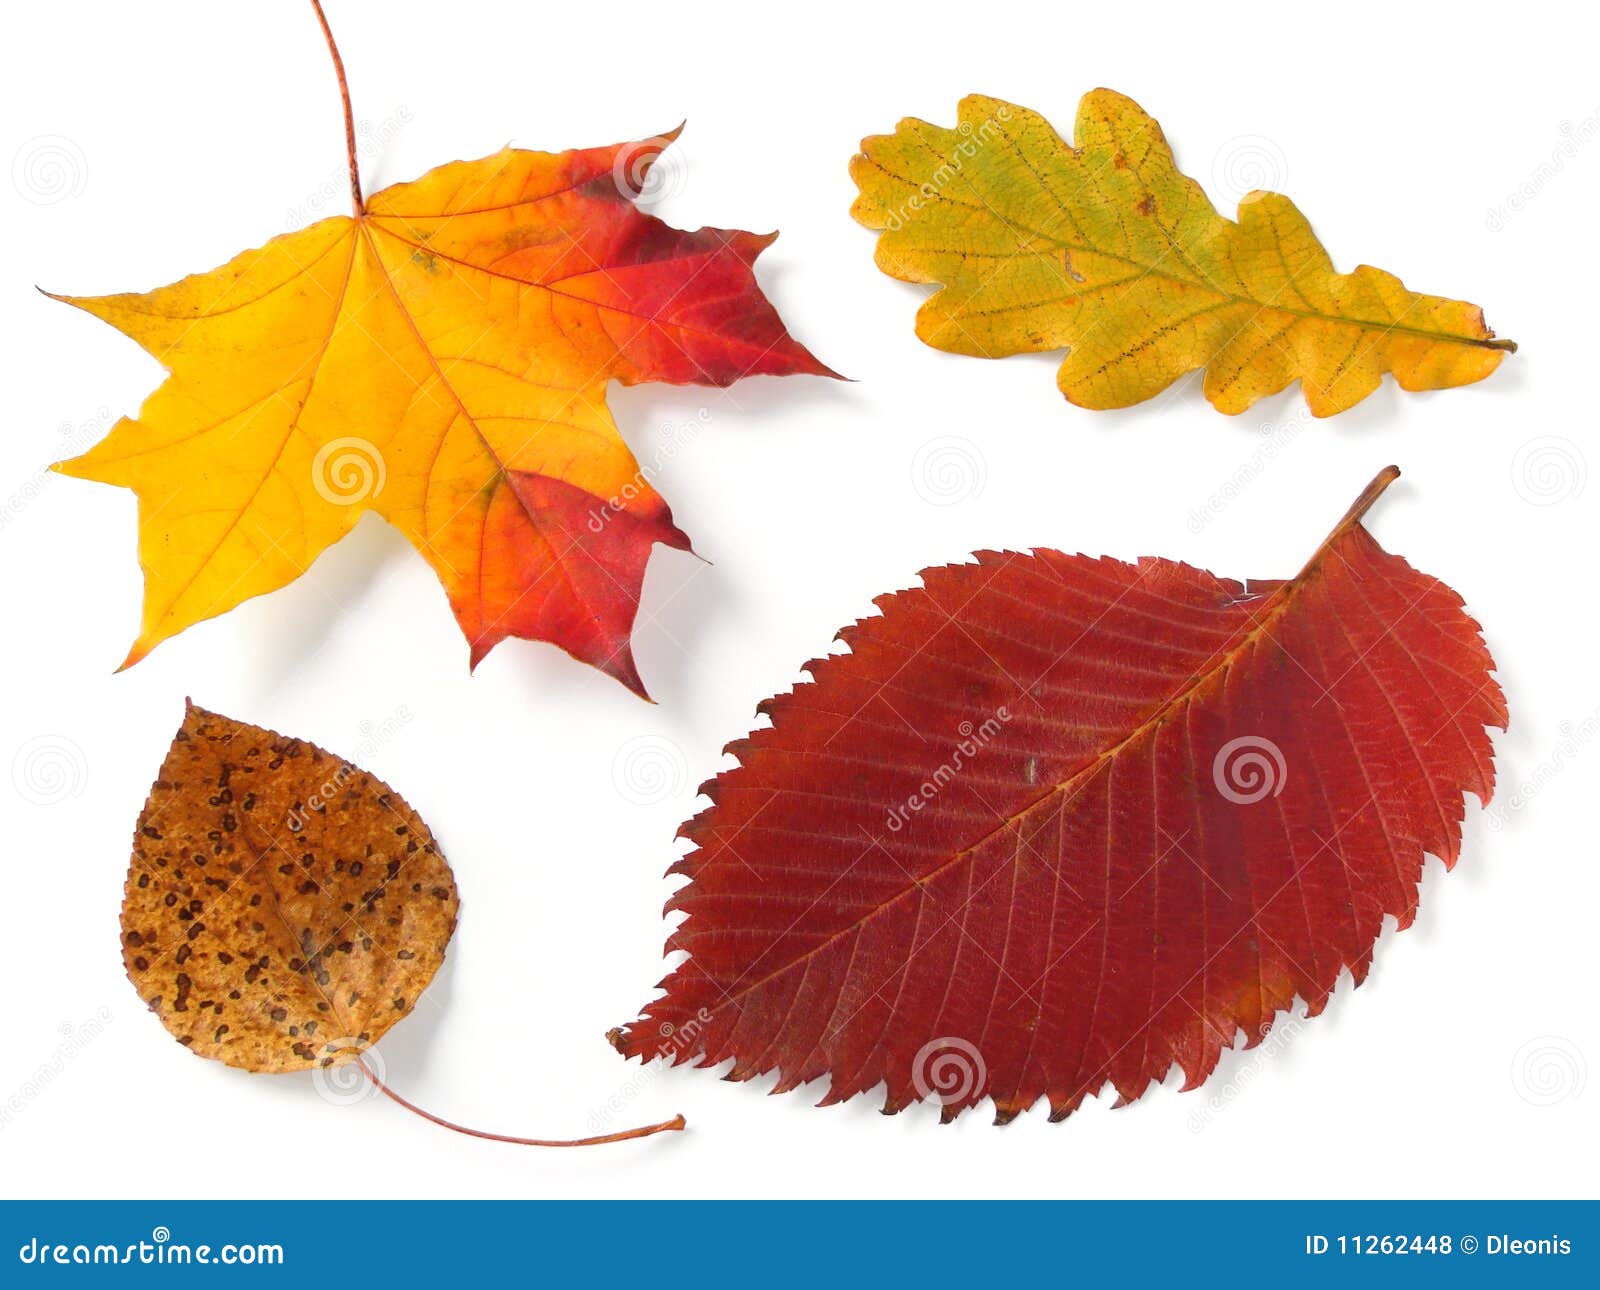 Four autumnal leaves stock photo. Image of october, awesome - 11262448